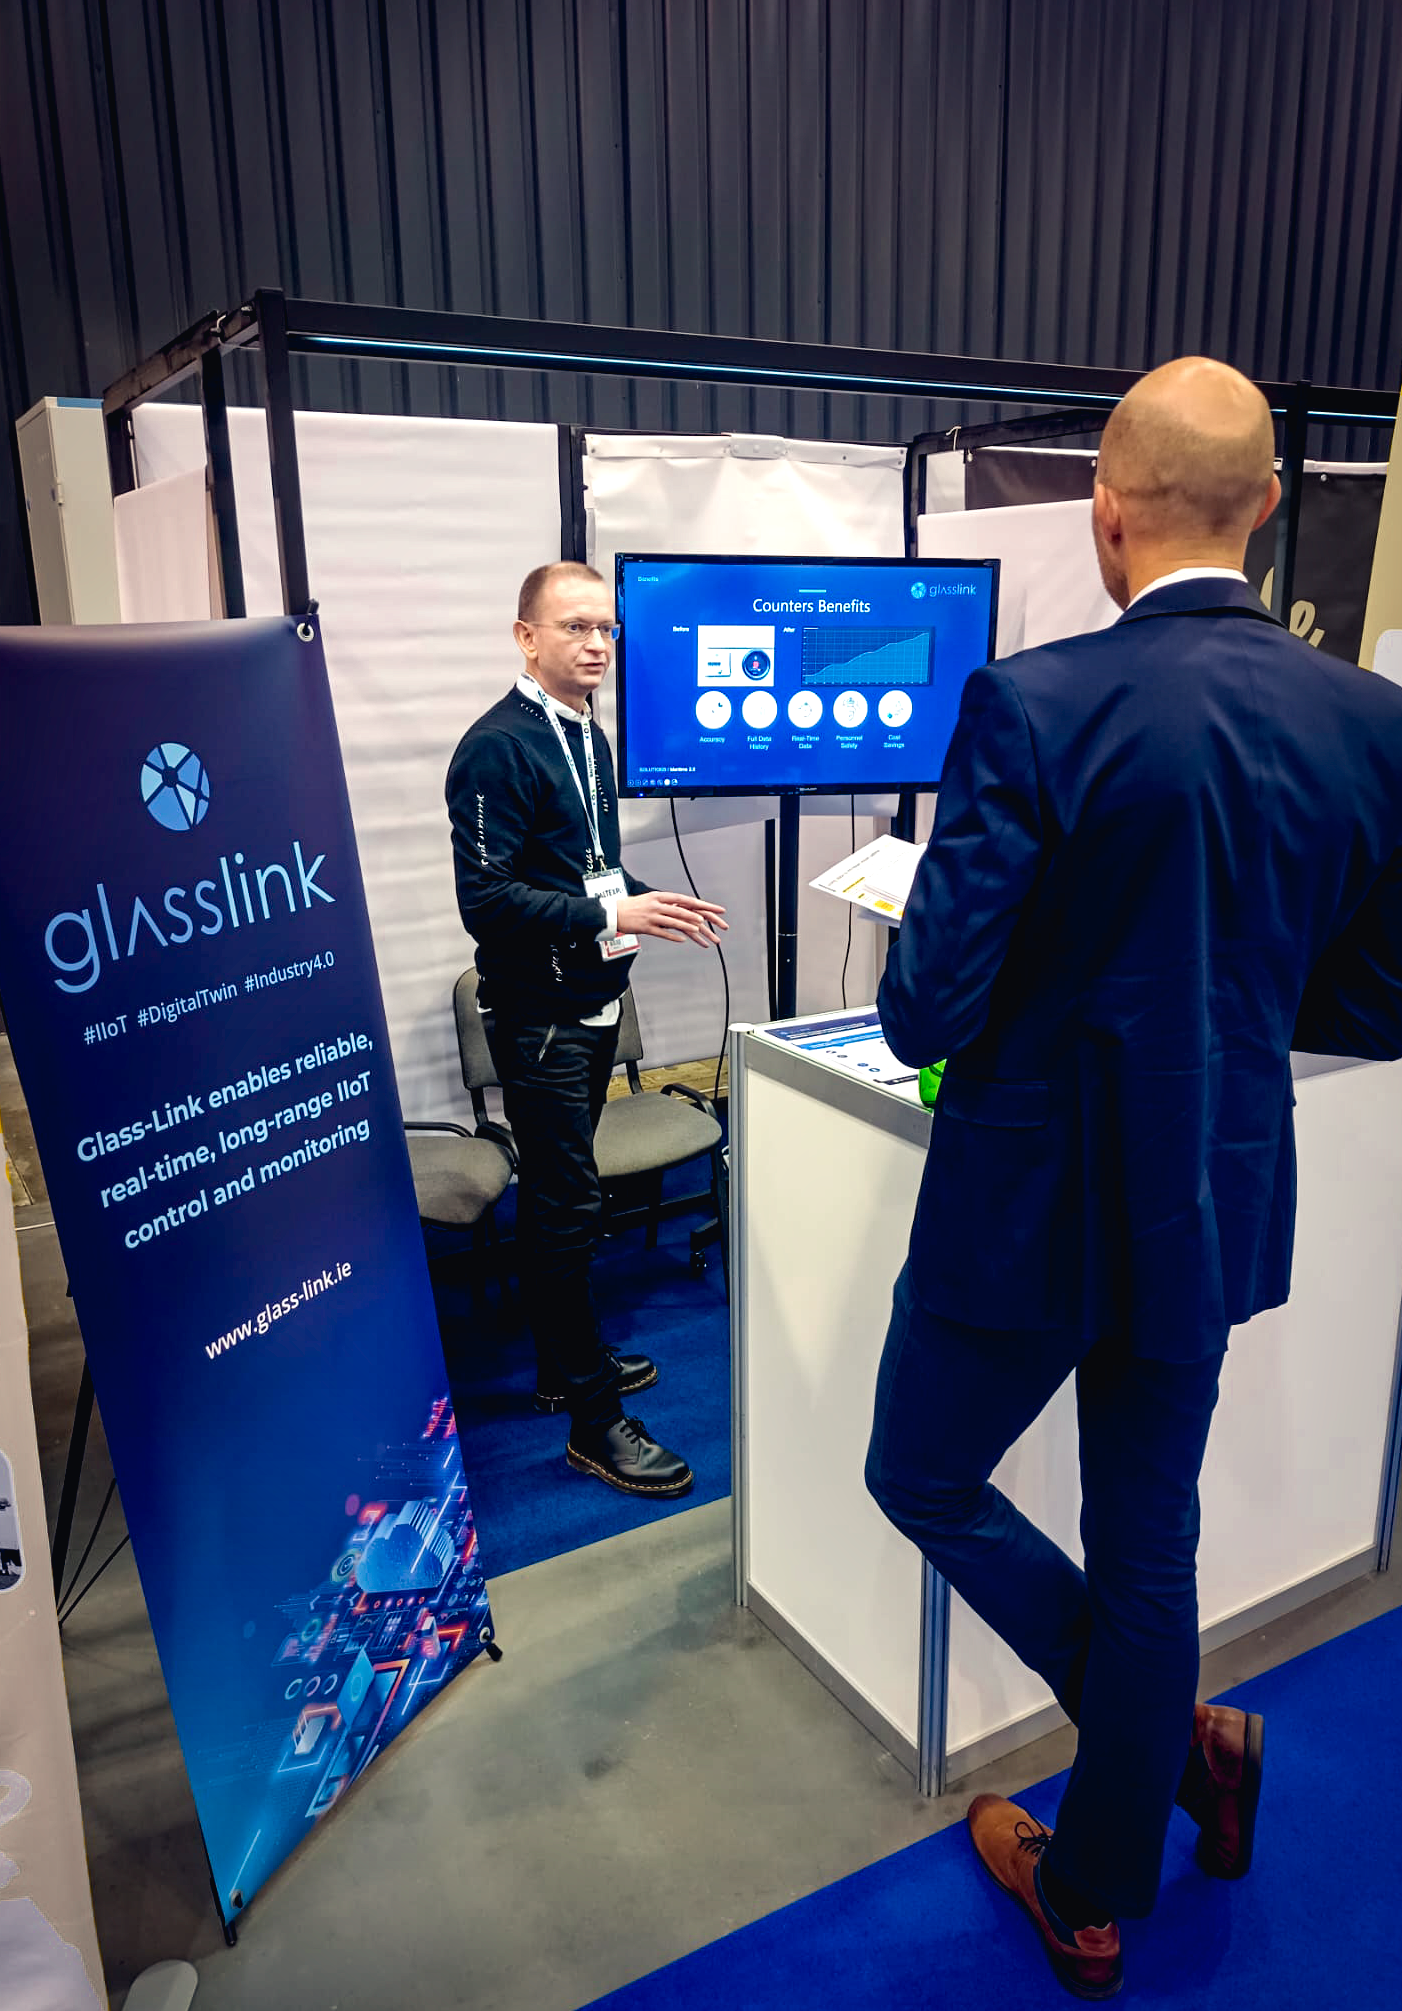 Our representatives at Glass-Link stand BALTEXPO 2023 presenting to new potential customer